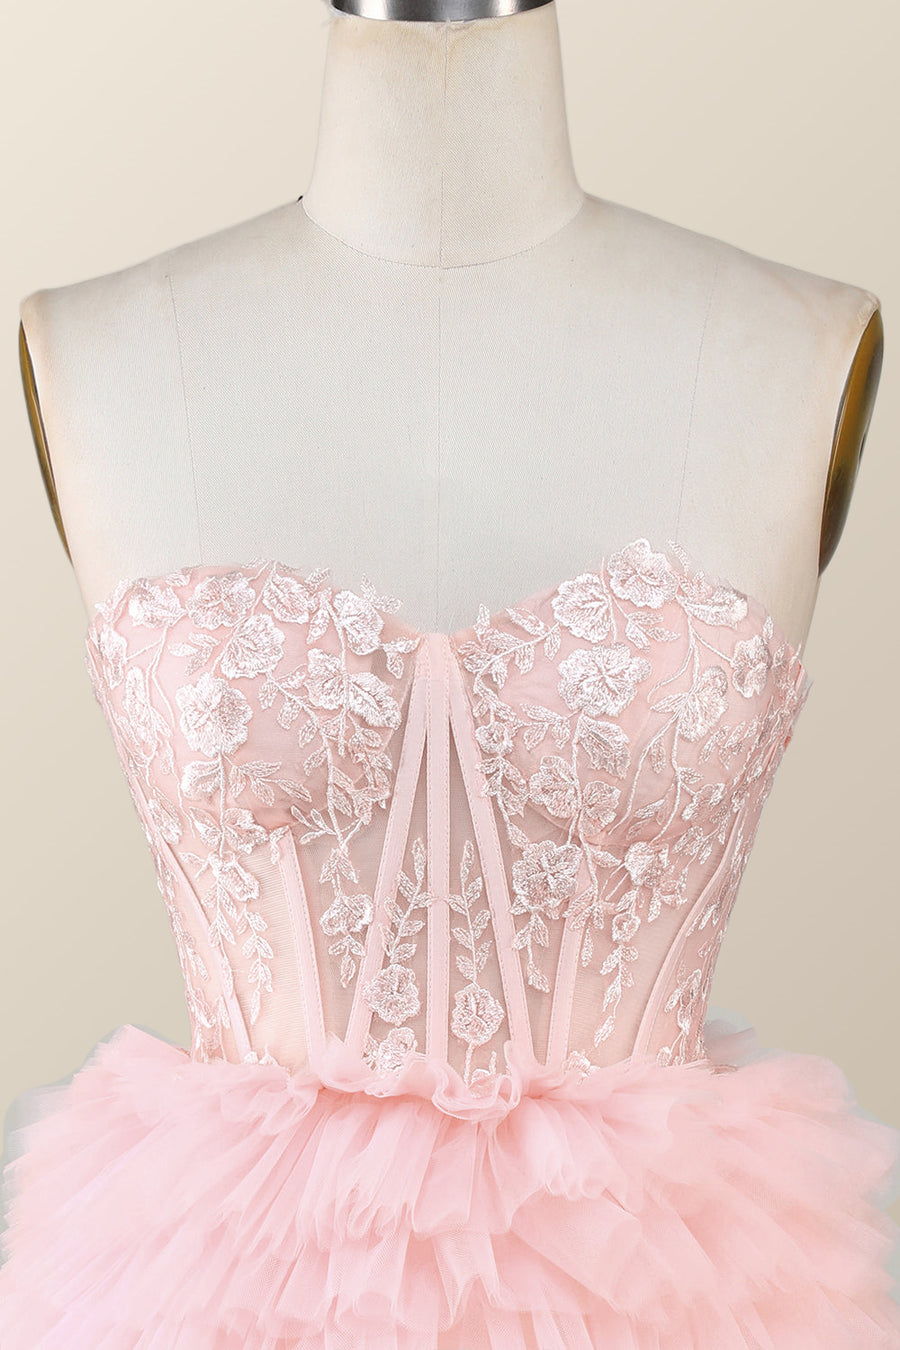 Pink Sweetheart Lace and Ruffles Short Tulle Dress